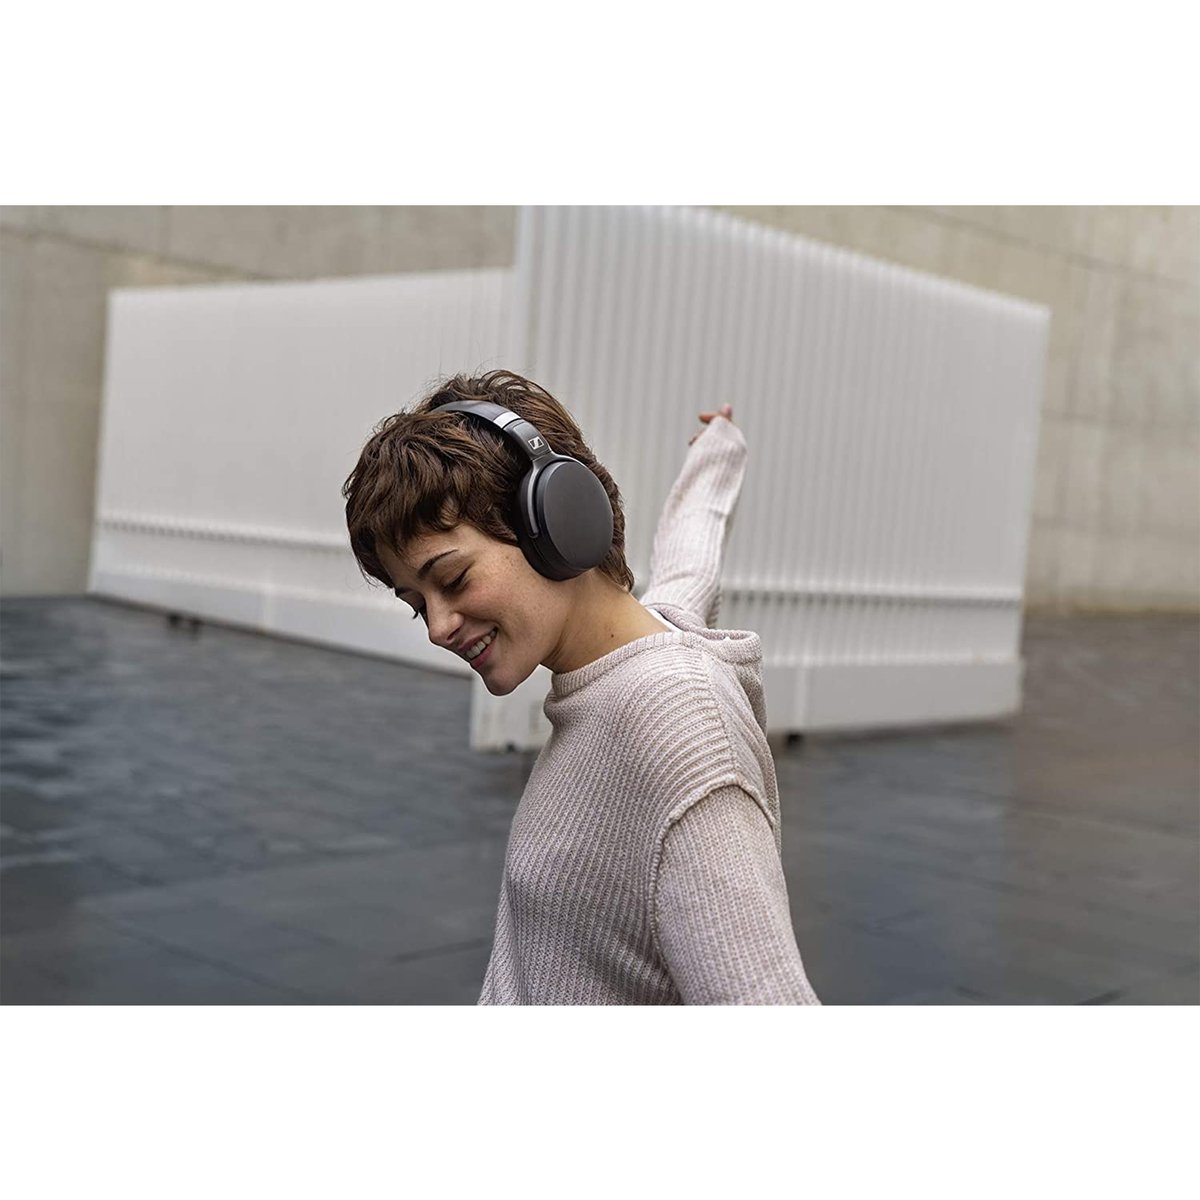 Sennheiser Consumer Audio HD 450BT Bluetooth 5.0 Wireless Headphone with  Active Noise Cancellation - 30-Hour Battery Life, USB-C Fast Charging